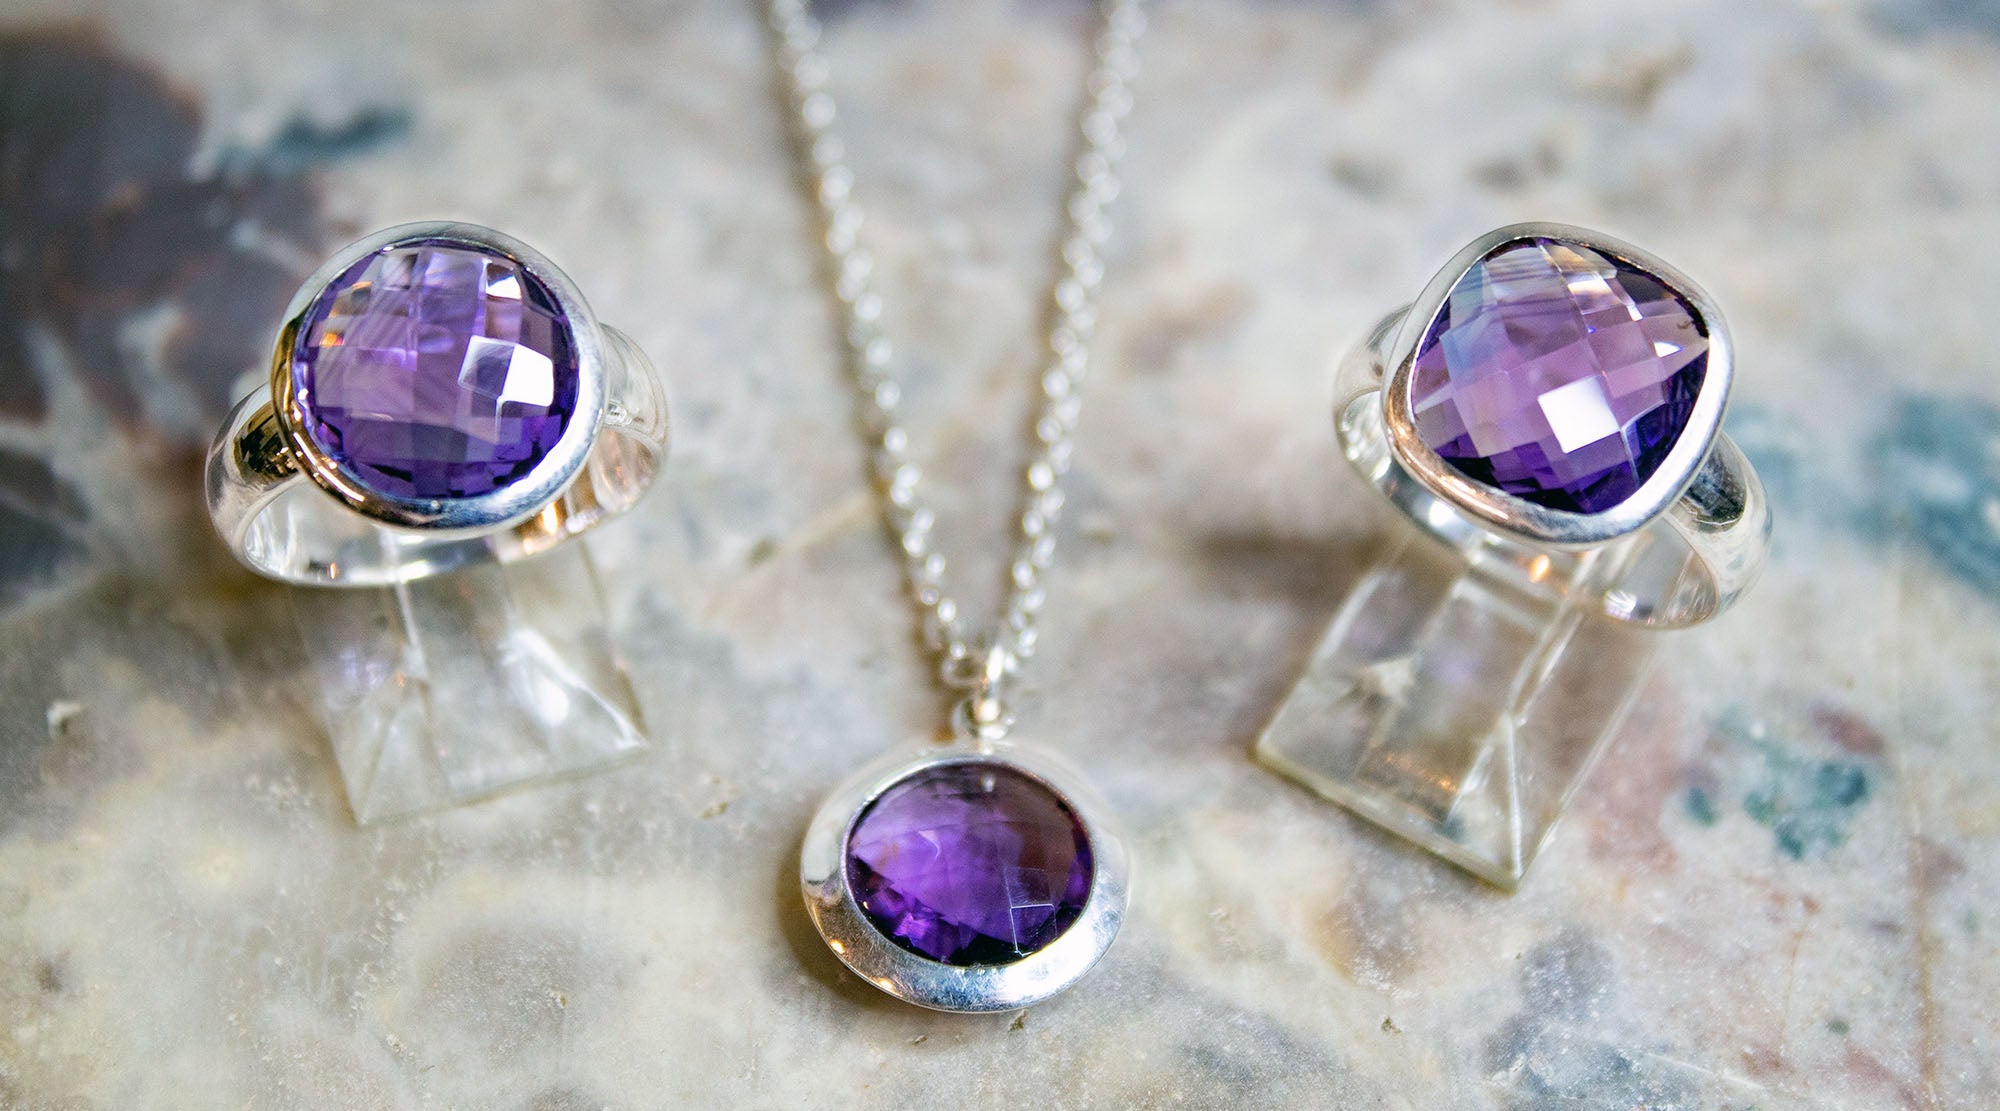 amethyst cz fashion rings and a pendant necklace on a marble surface